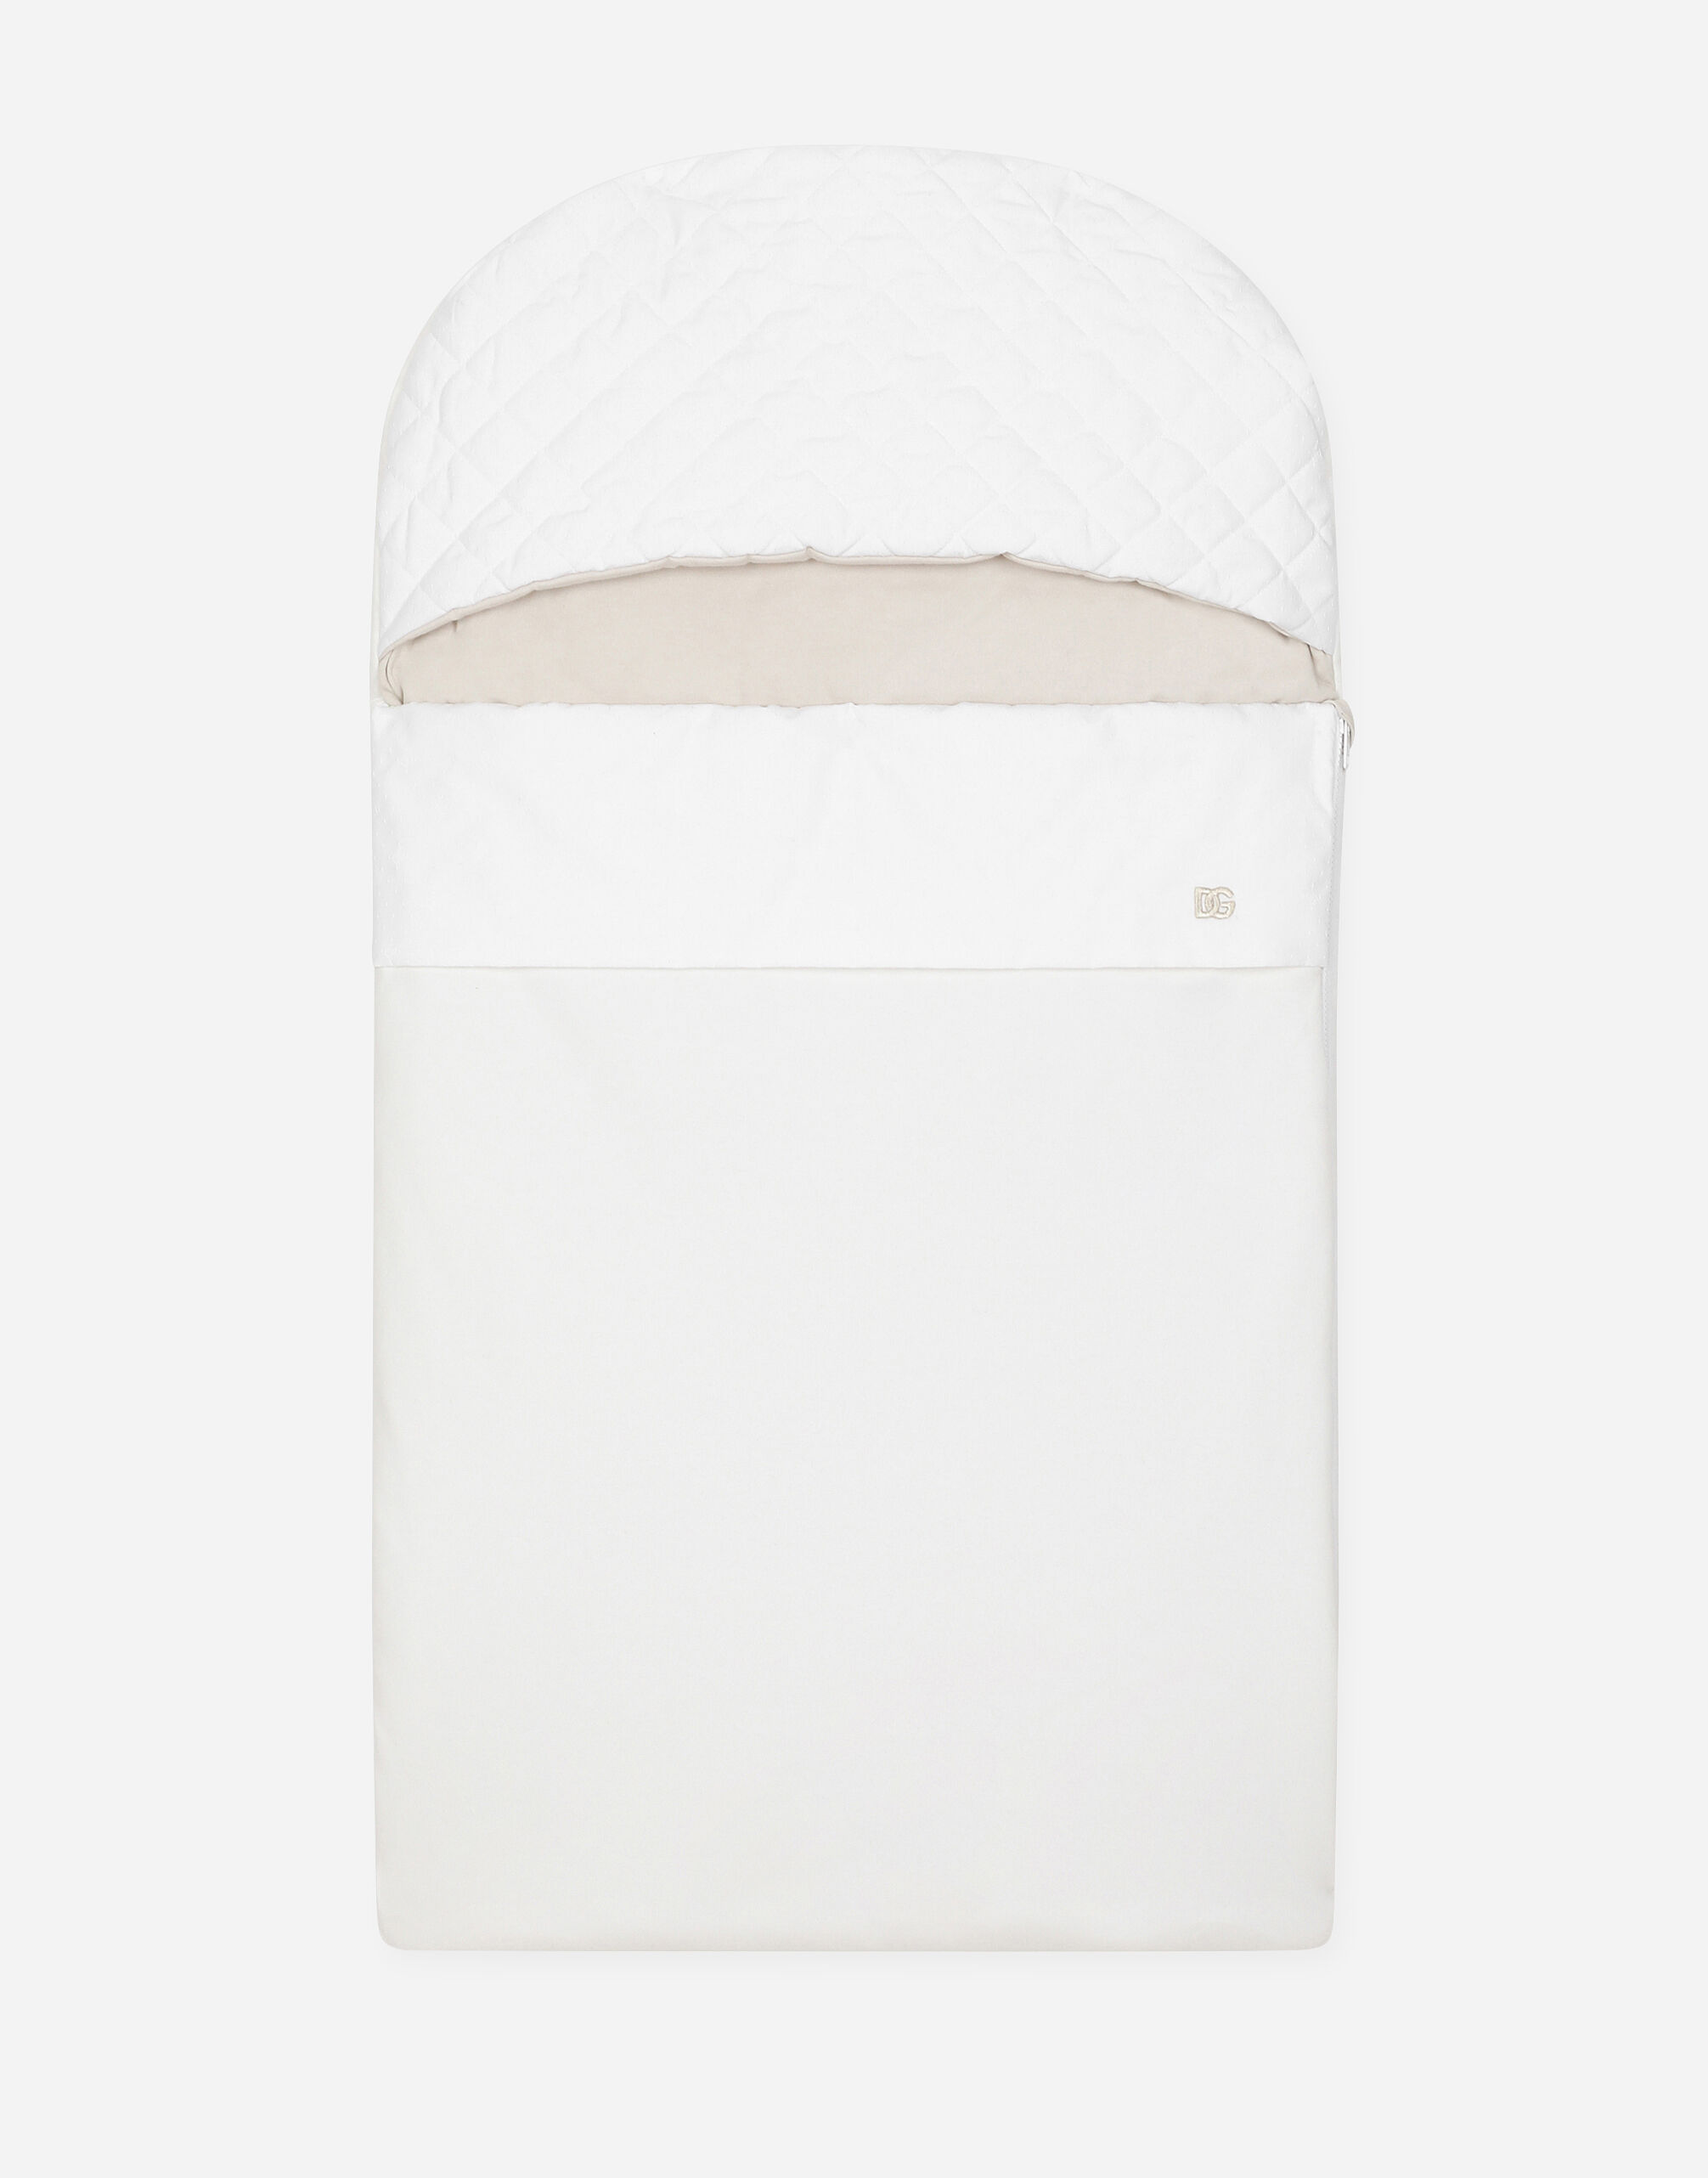 ${brand} Quilted jacquard sleep sack with DG logo ${colorDescription} ${masterID}